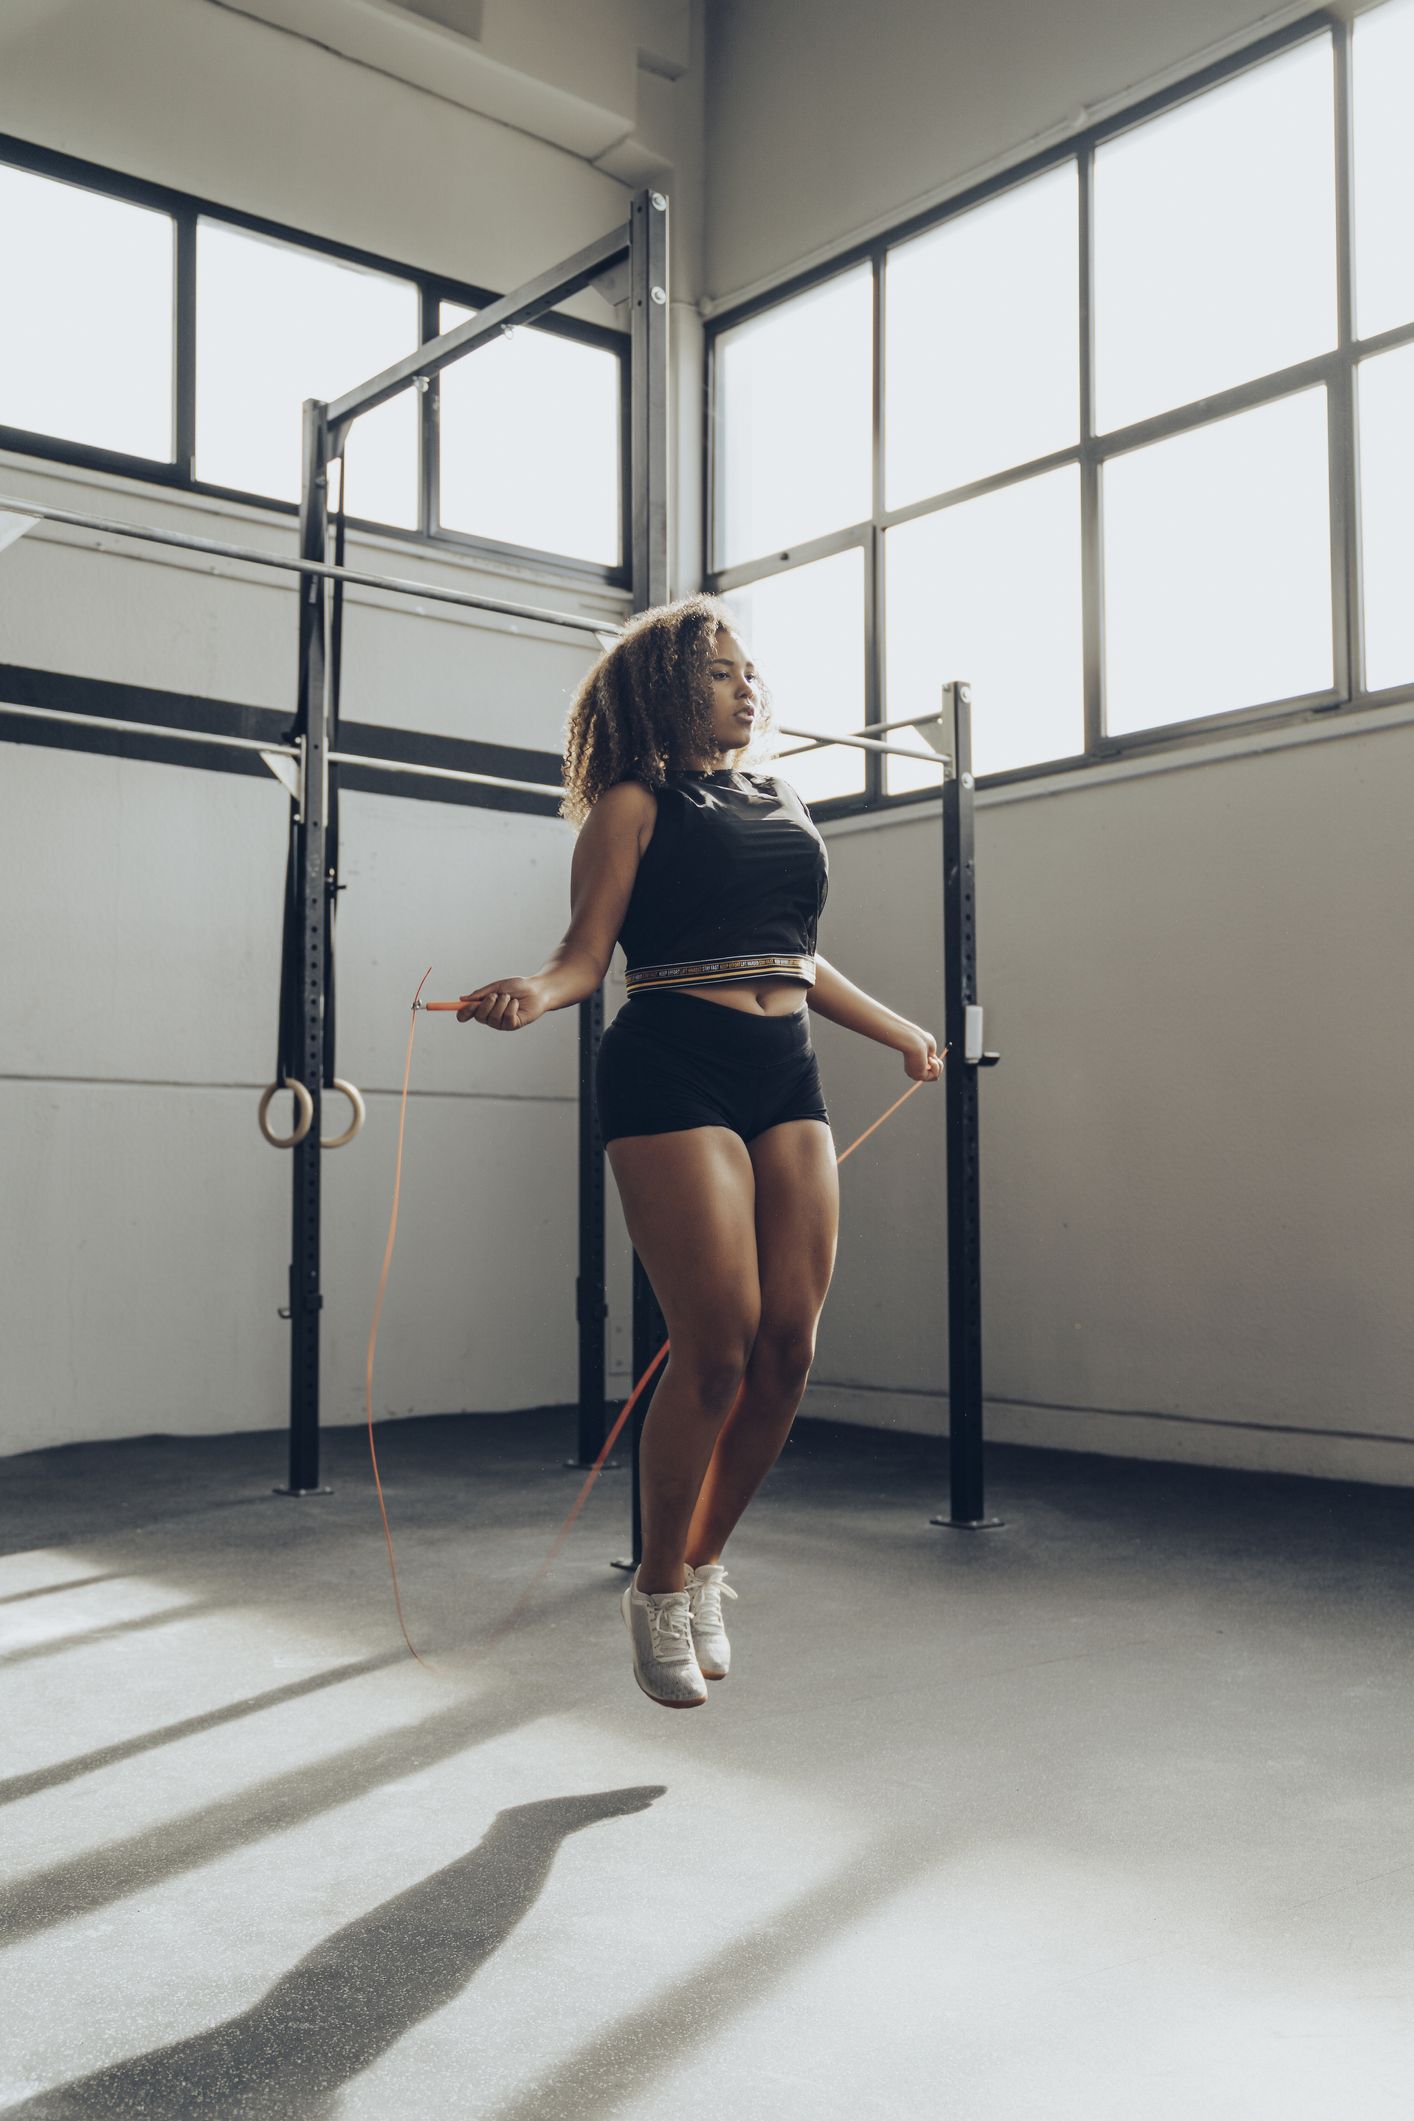 https://hips.hearstapps.com/hmg-prod/images/young-woman-skipping-rope-in-gym-royalty-free-image-1692362300.jpg